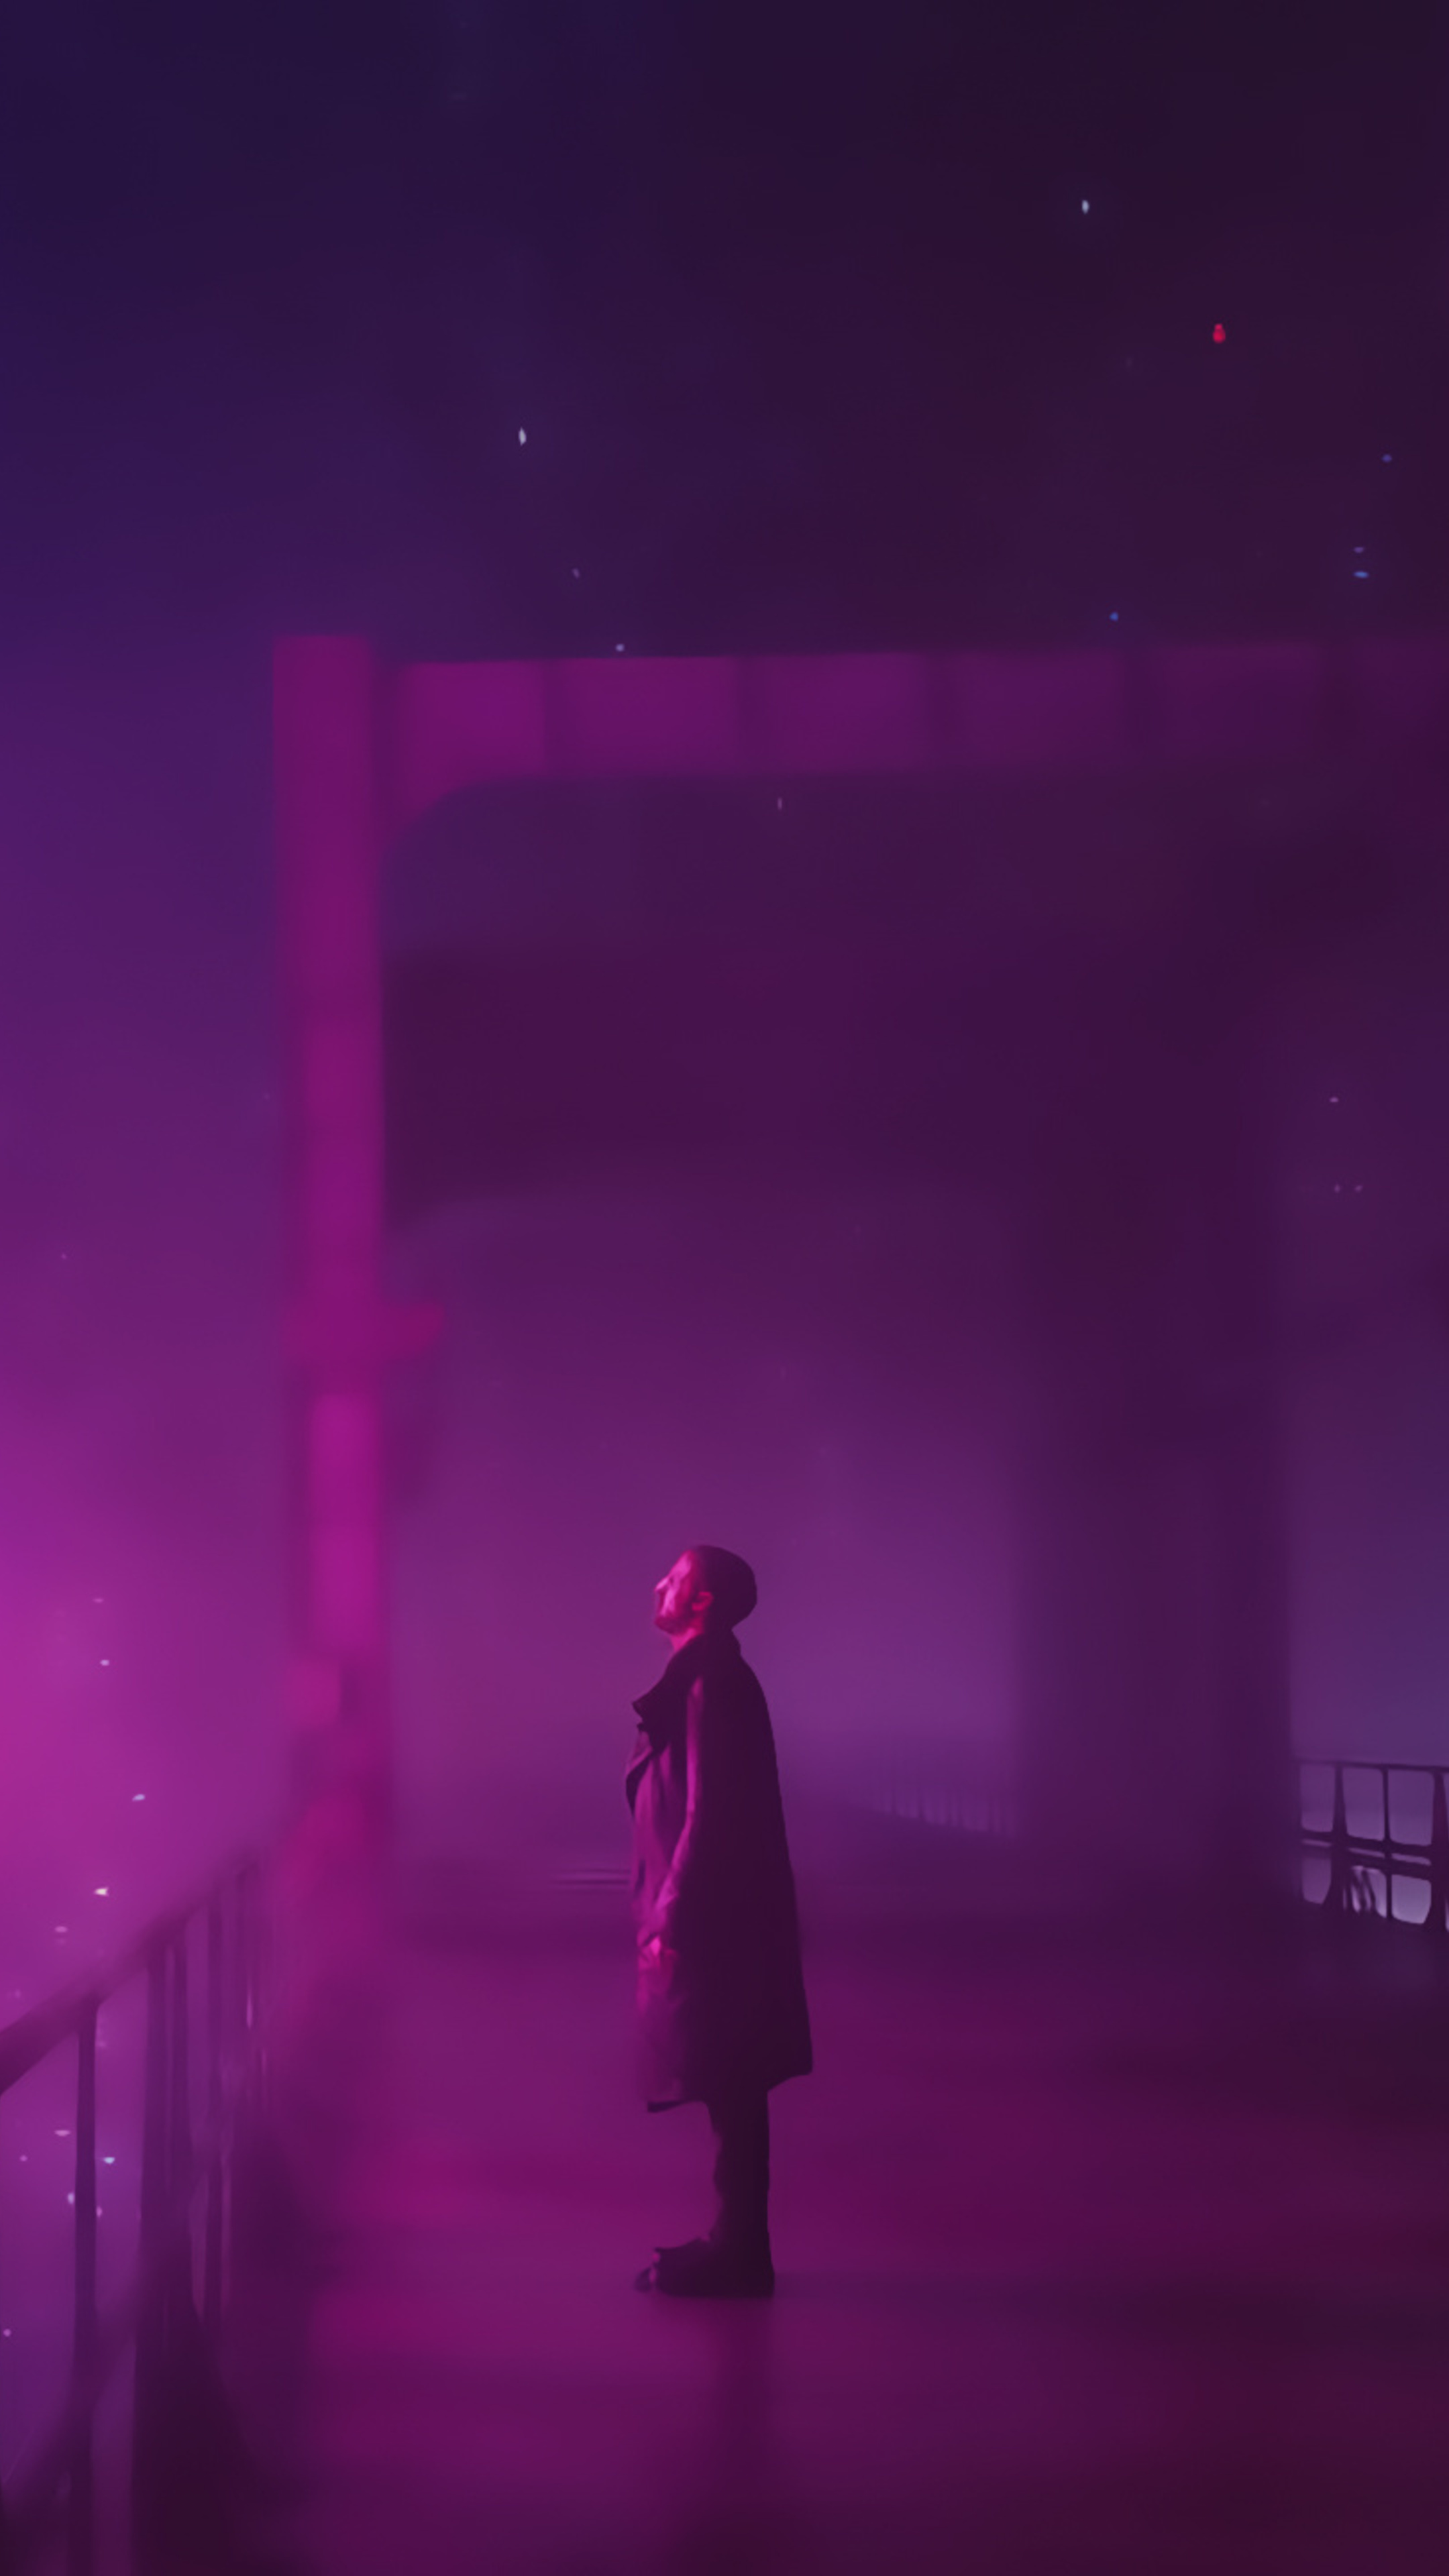 2017 Blade Runner 2049 movie, 4K Sony Xperia wallpapers, HD images, 2160x3840 4K Handy